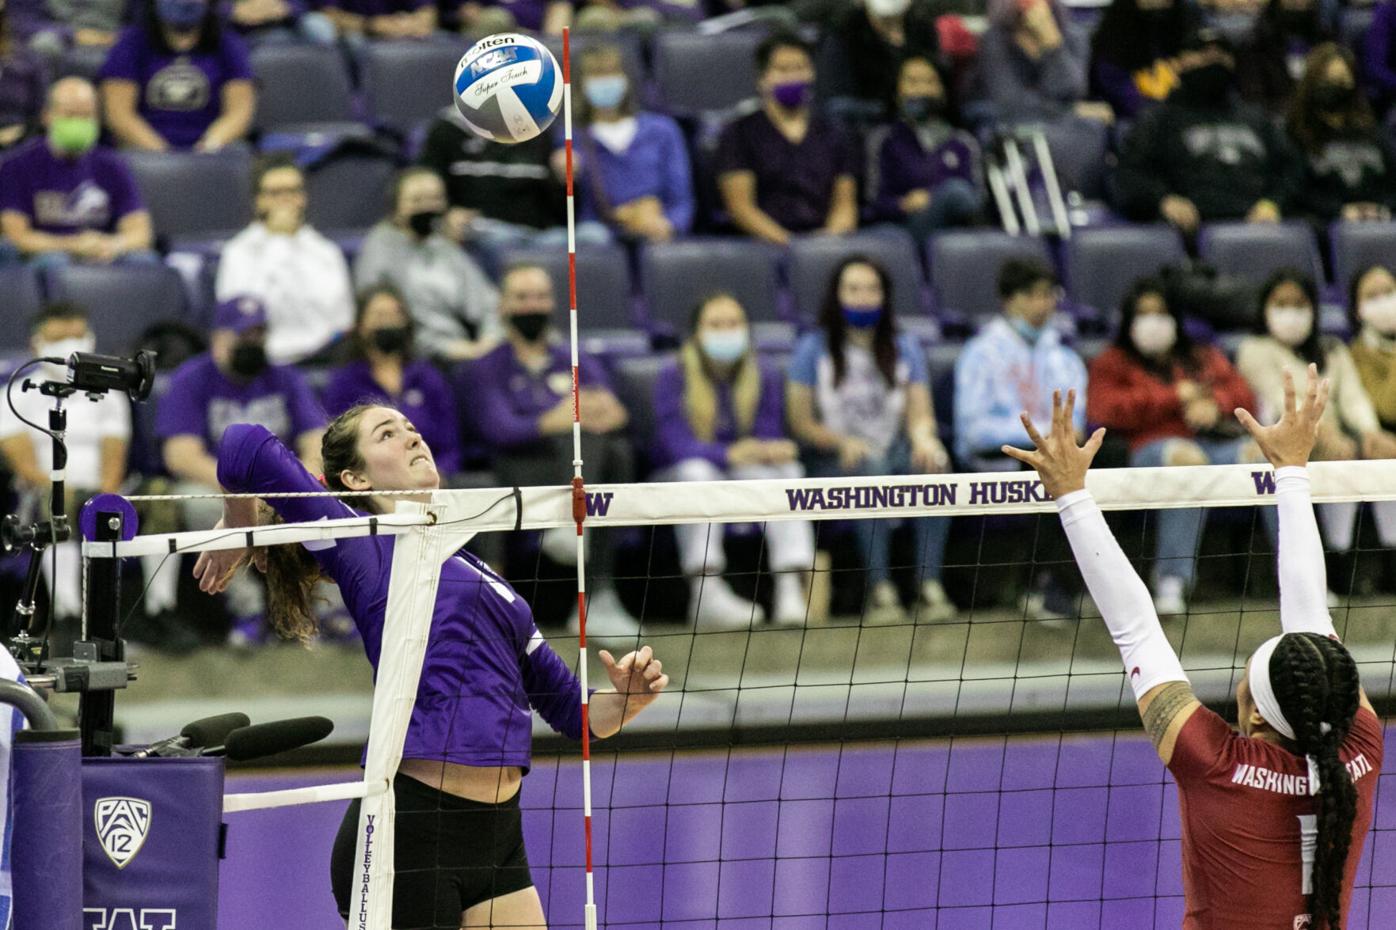 Huskies take down Cougars to win second consecutive Pac-12 title (2)